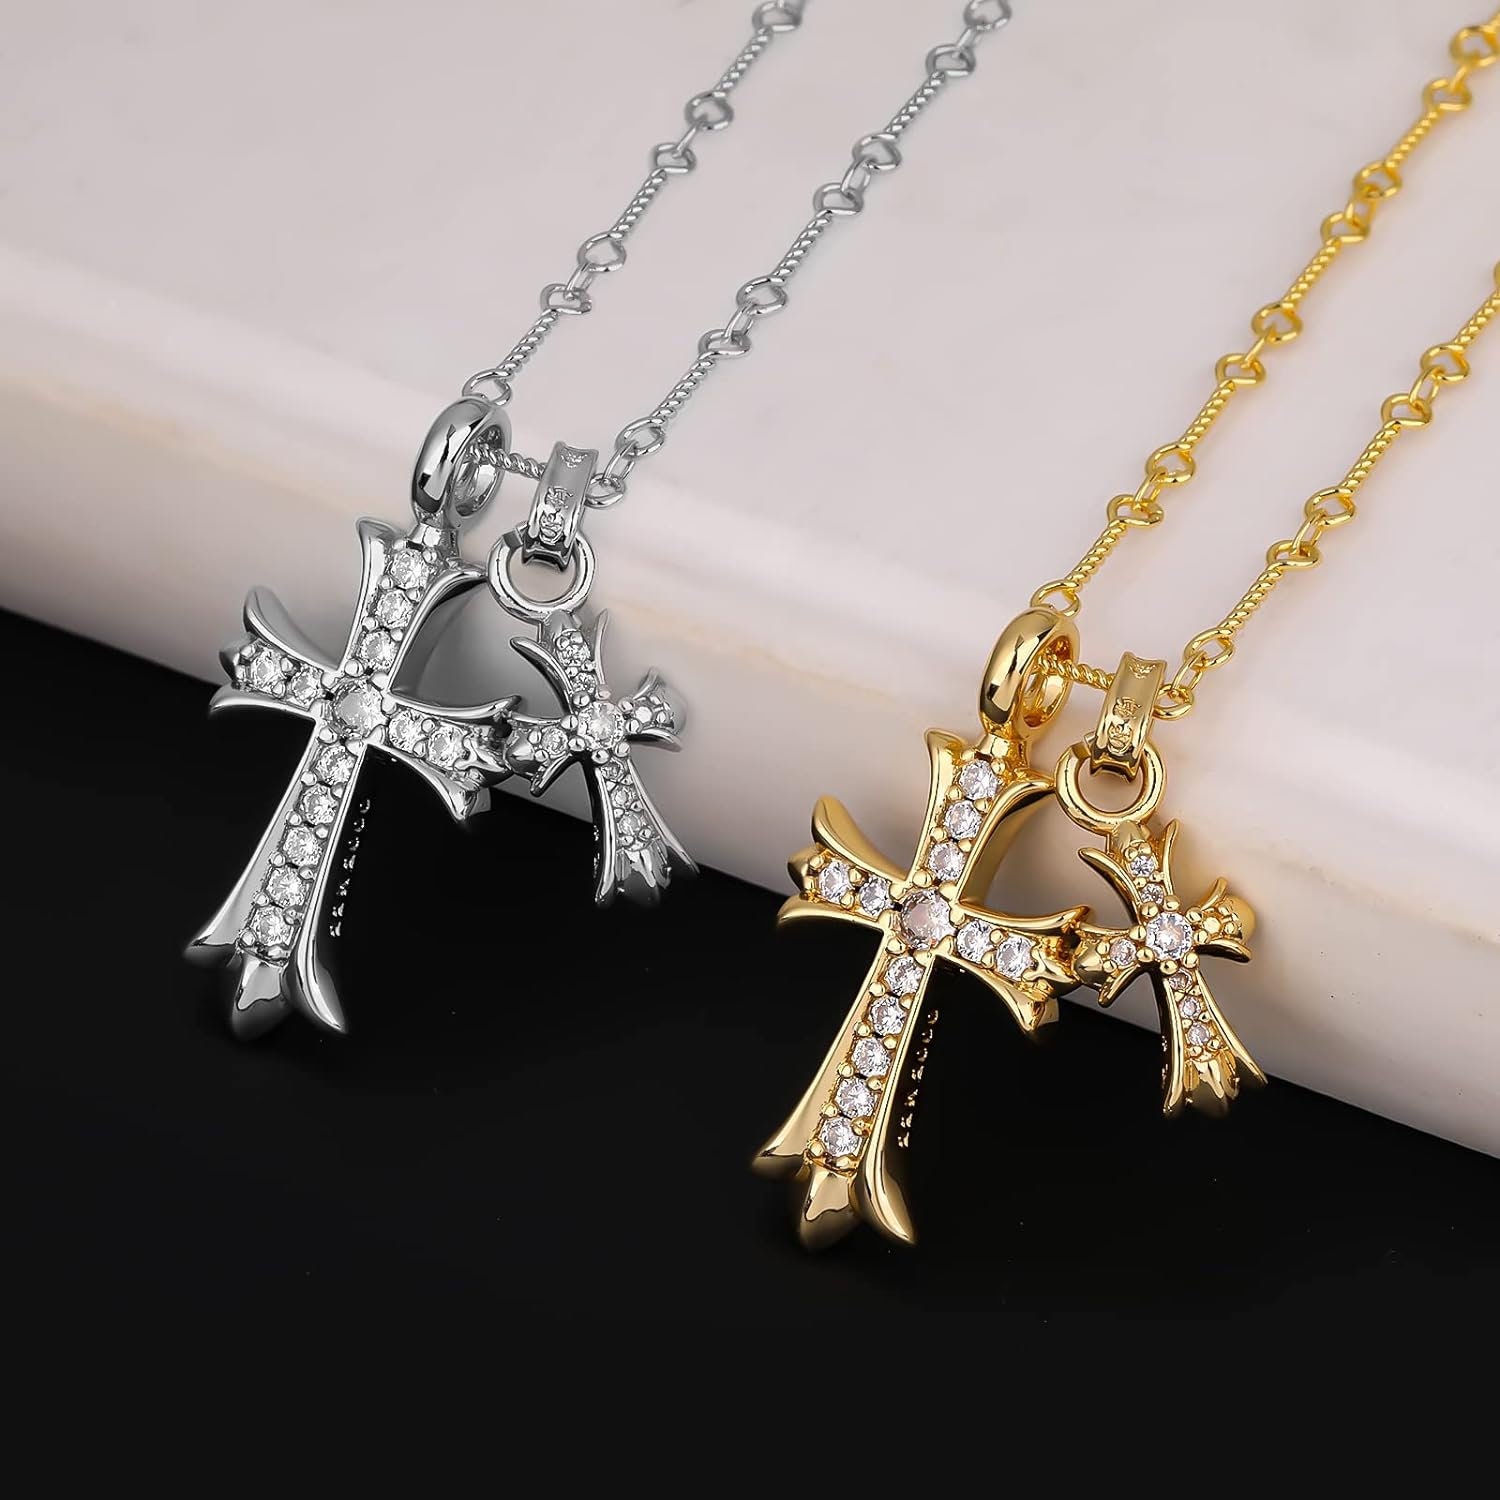 Luxurious Double Cross Pendant Necklace Perfect Gift for Any Occasion ...